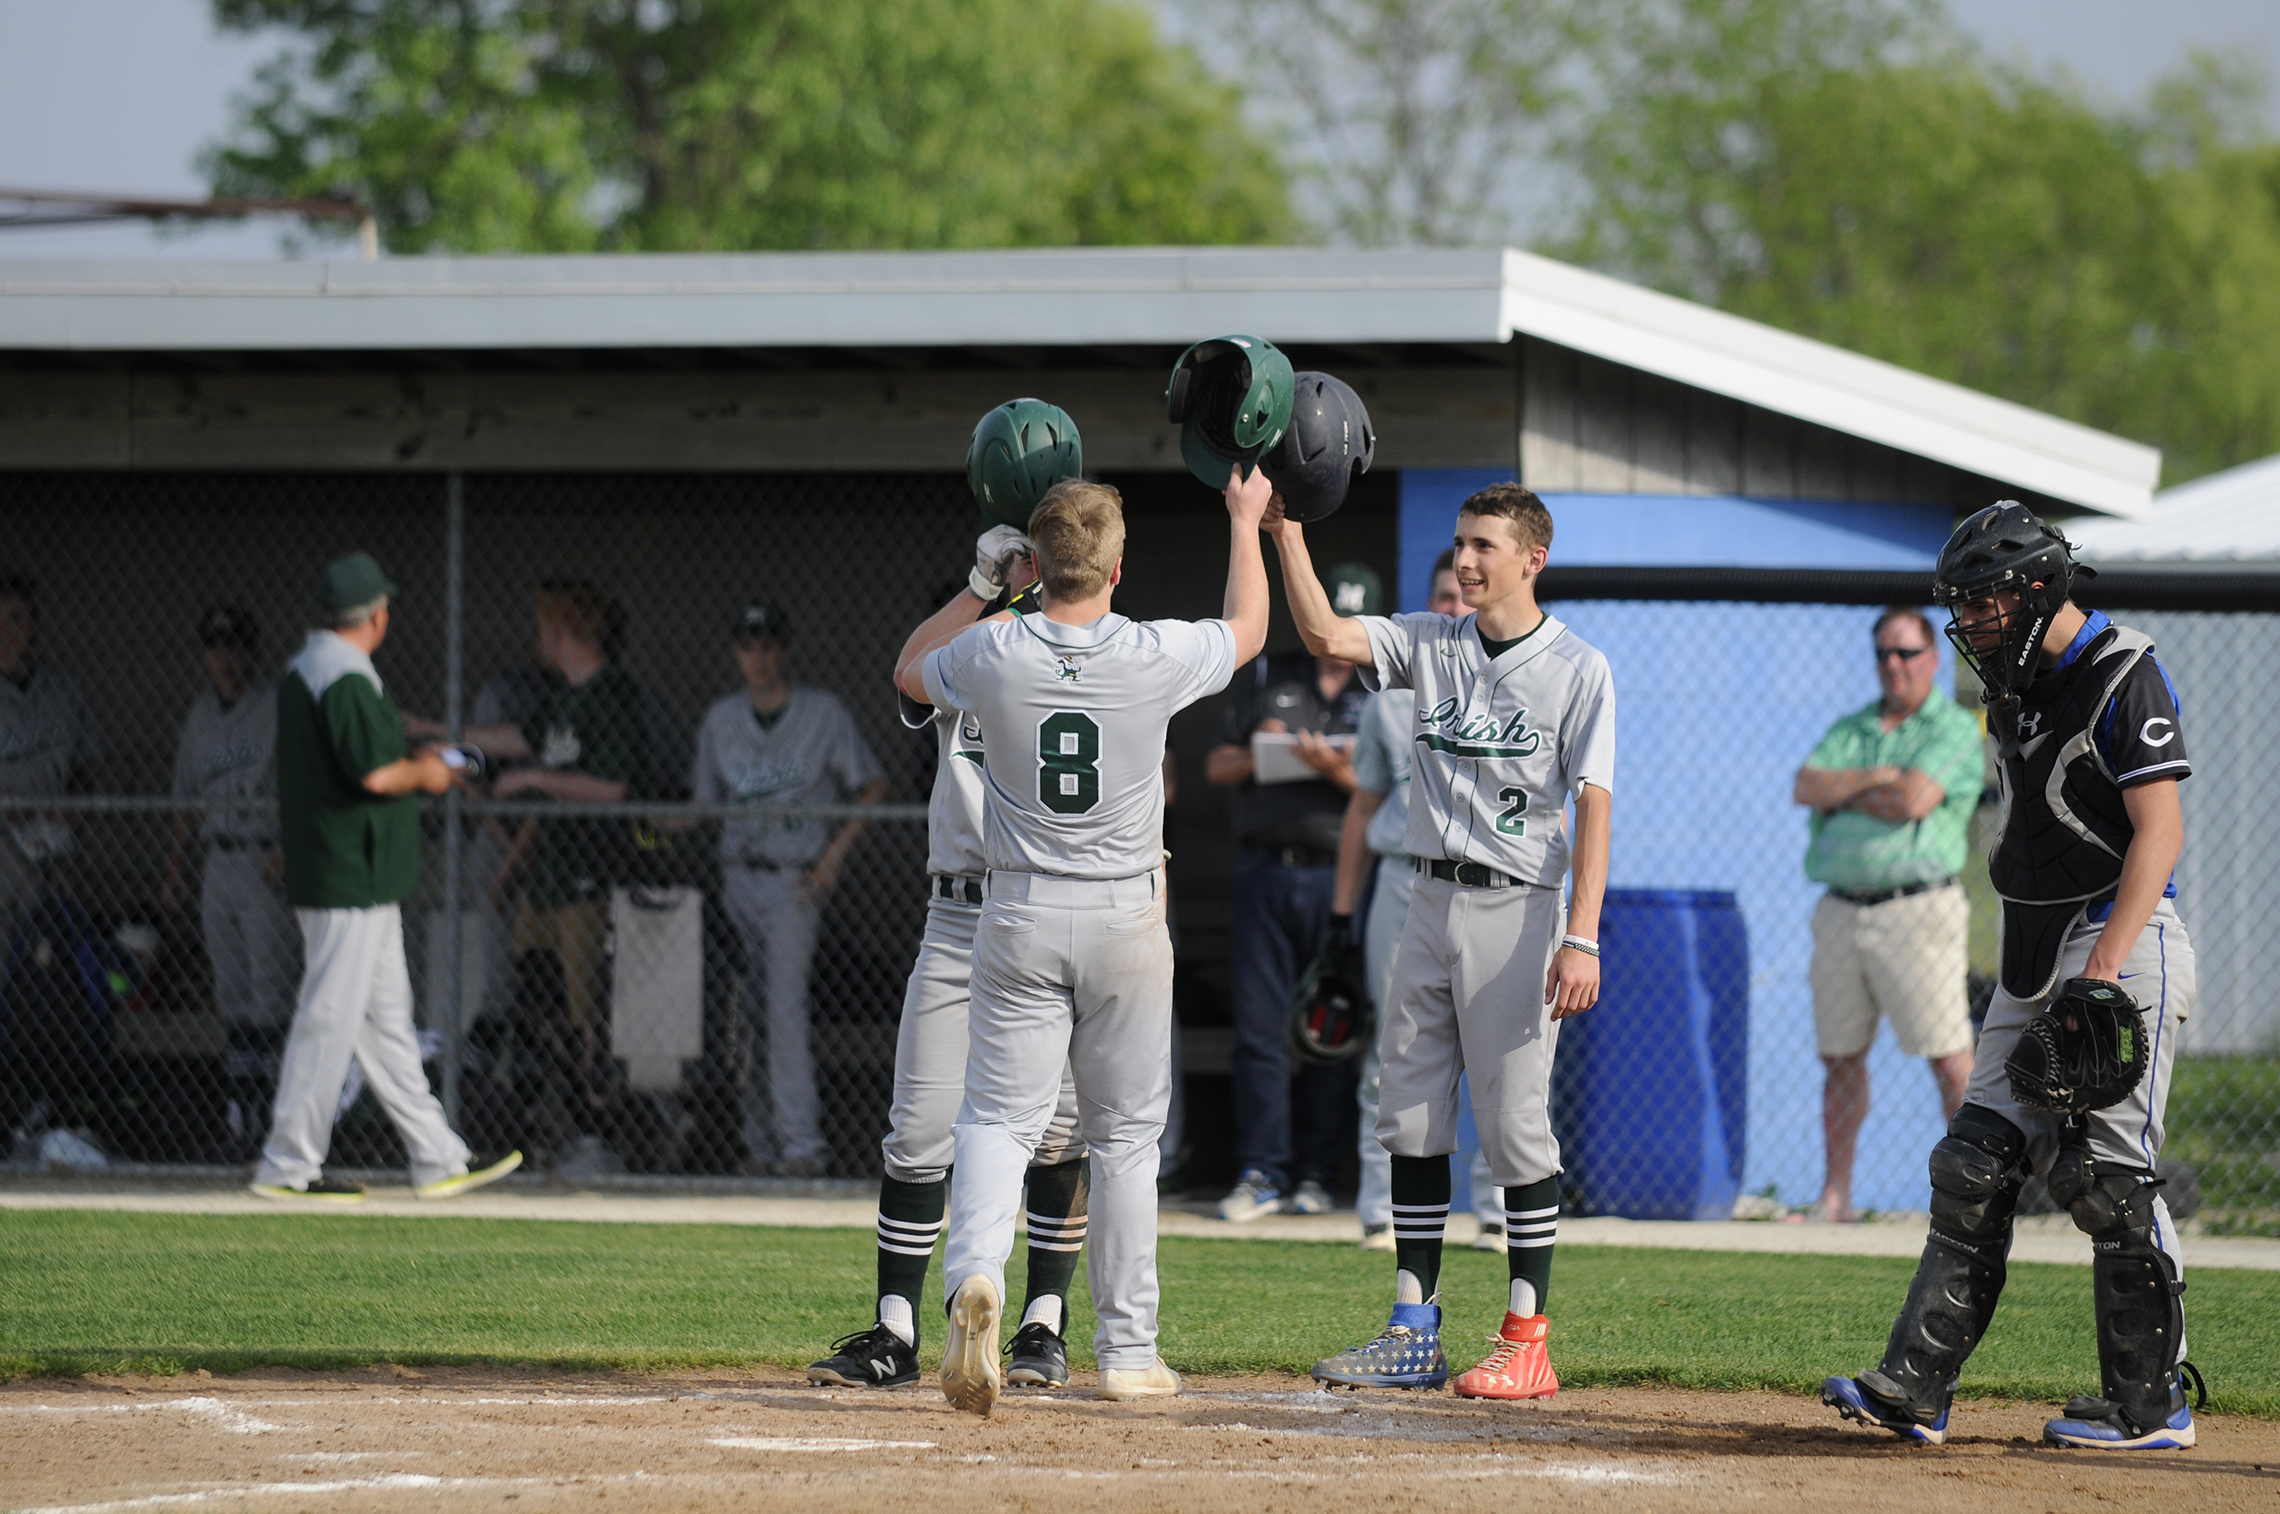  Teammates congratulate Bishop McNamara’s Tyler Hiller after a home run hit Monday during the game against Clifton Central. Bishop McNamara’s Fightin’ Irish won the game 14-0 to end the season for the Clifton Central Comets.    